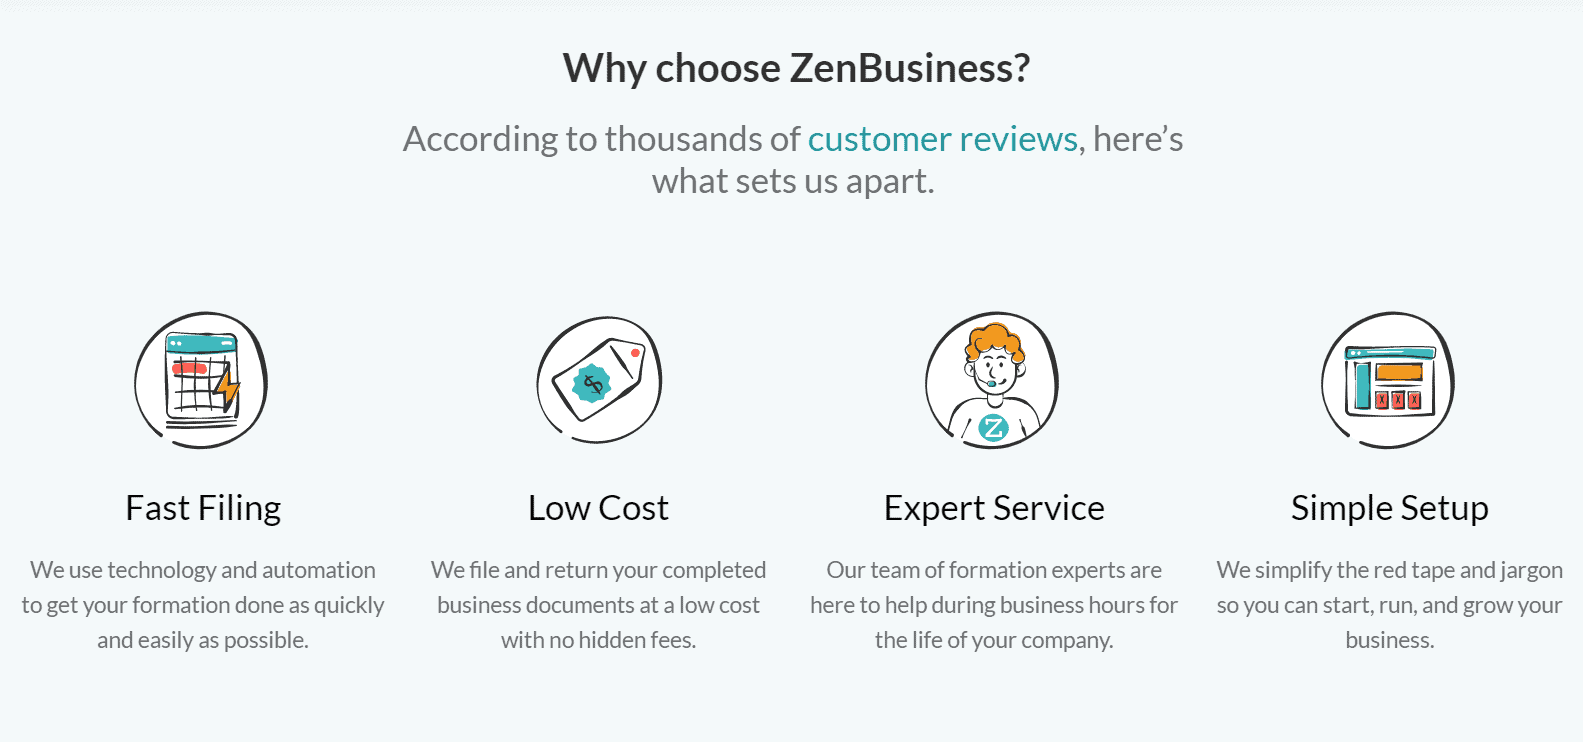 Why choose ZenBusiness